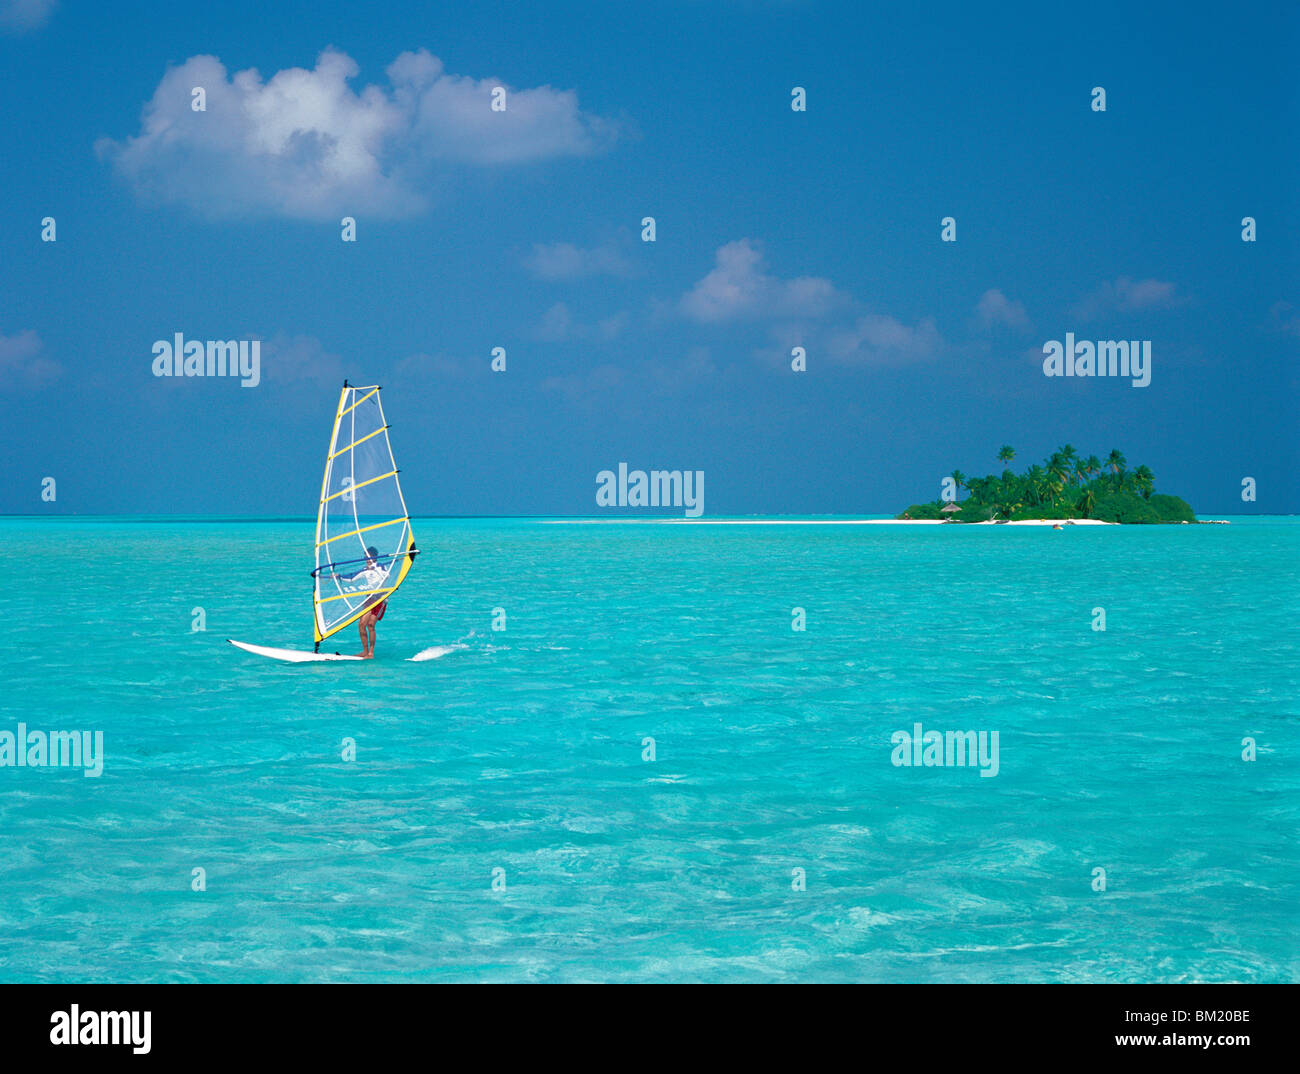 Young man windsurfing near tropical island and lagoon in the Maldives, Indian Ocean Stock Photo